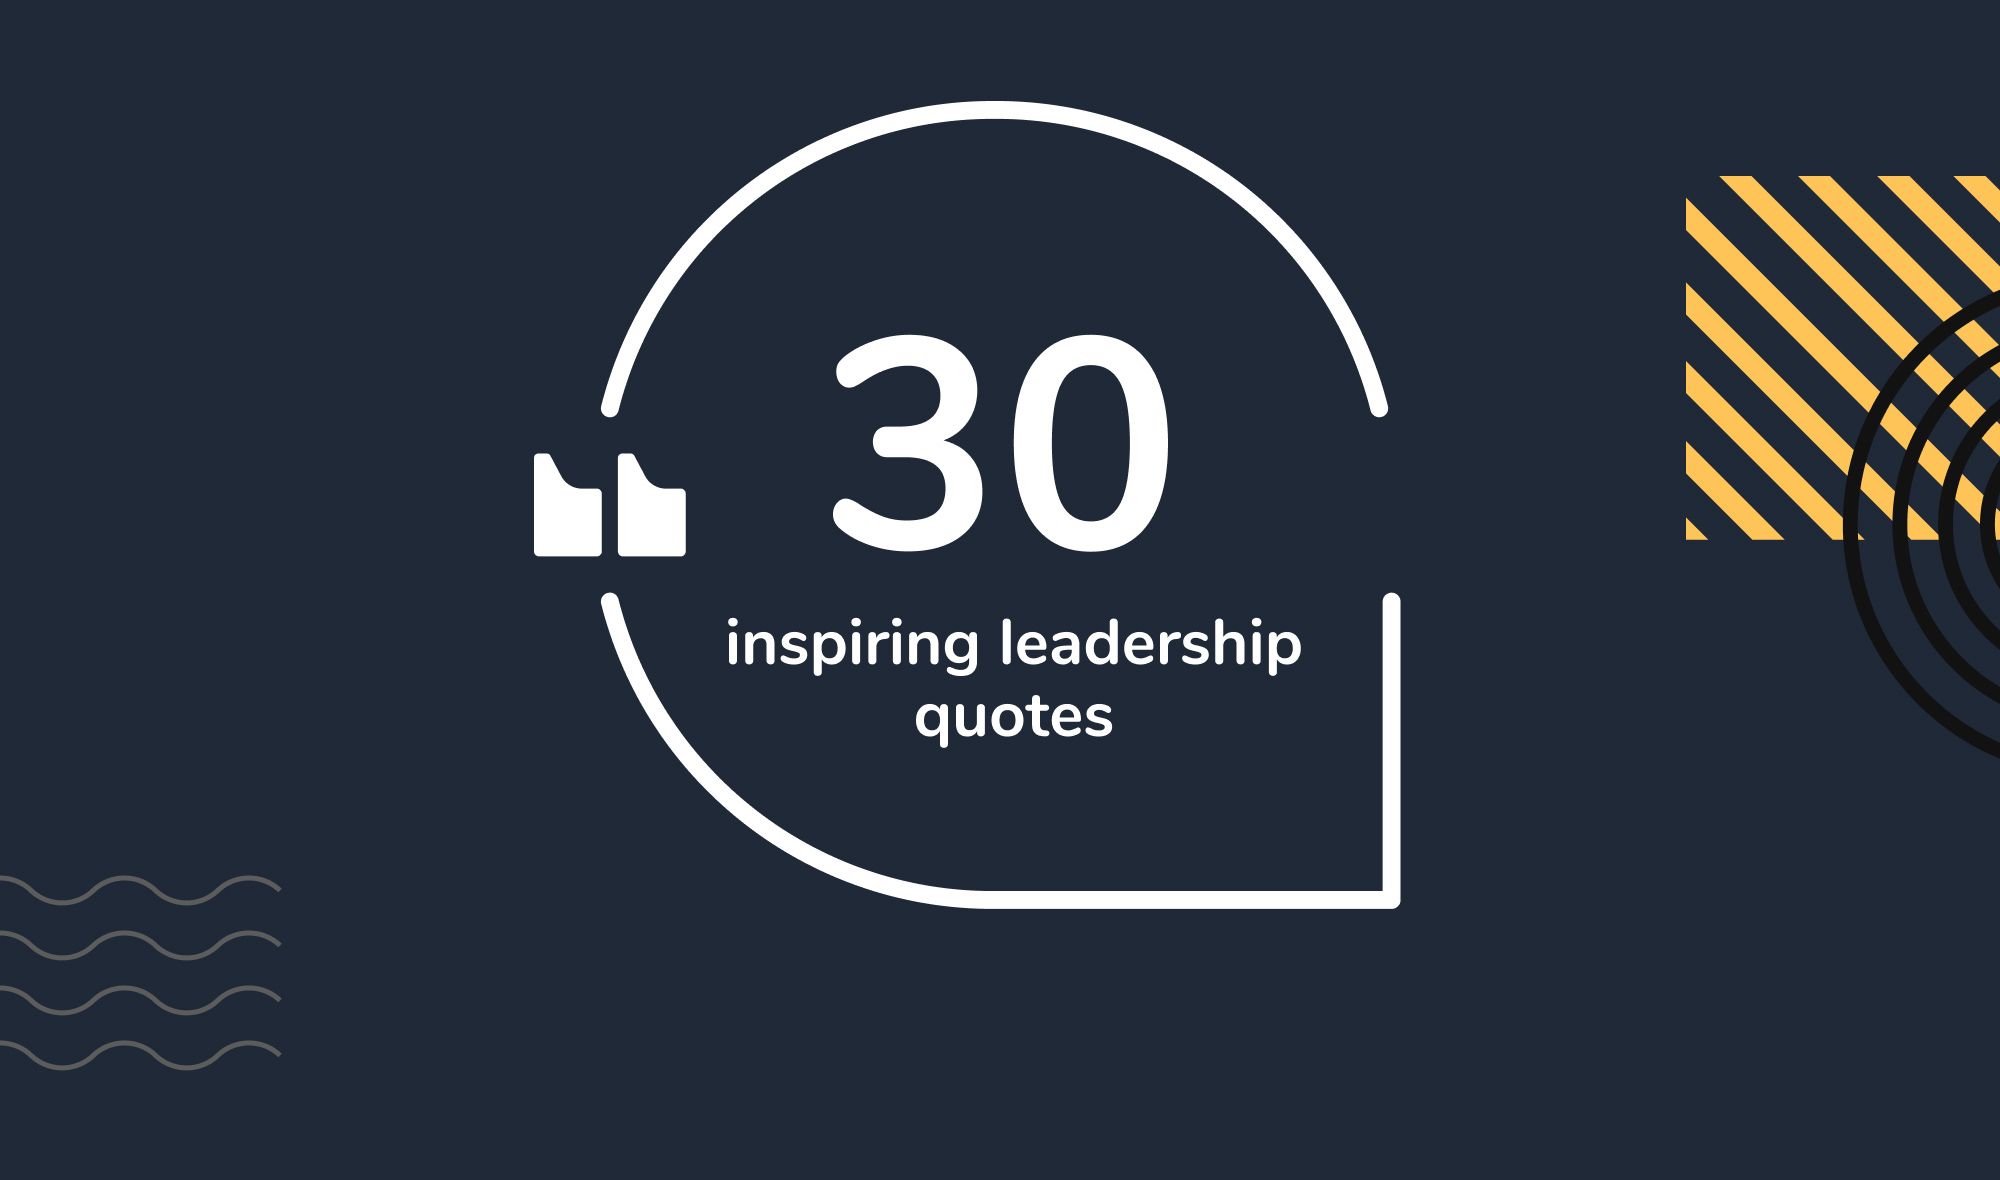 Leadership coaching quotes - 30 of the best leadership quotes of all time